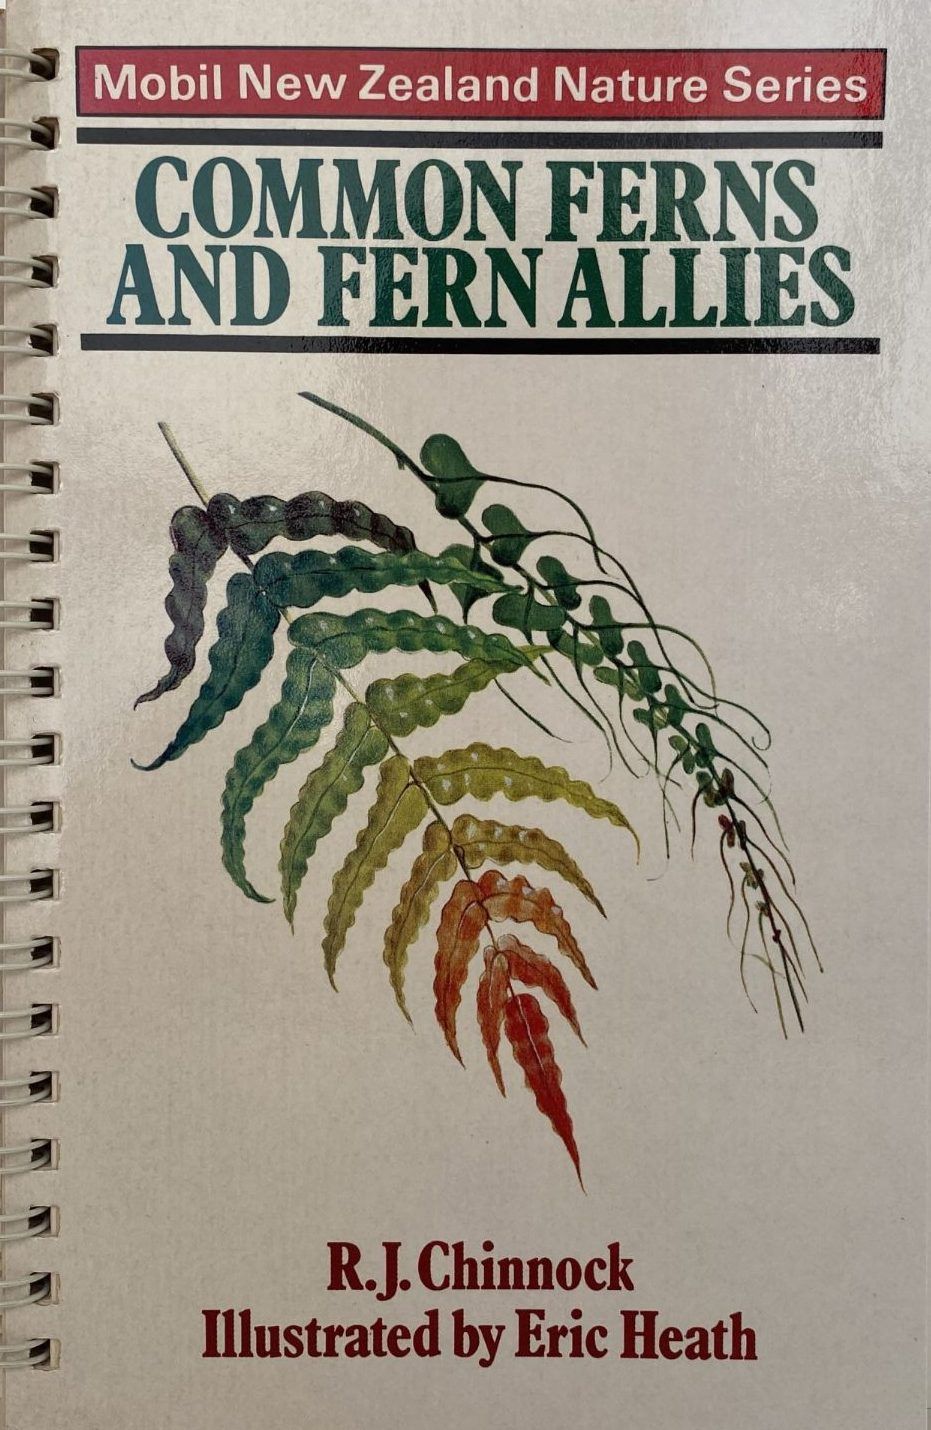 COMMON FERNS AND FERN ALLIES